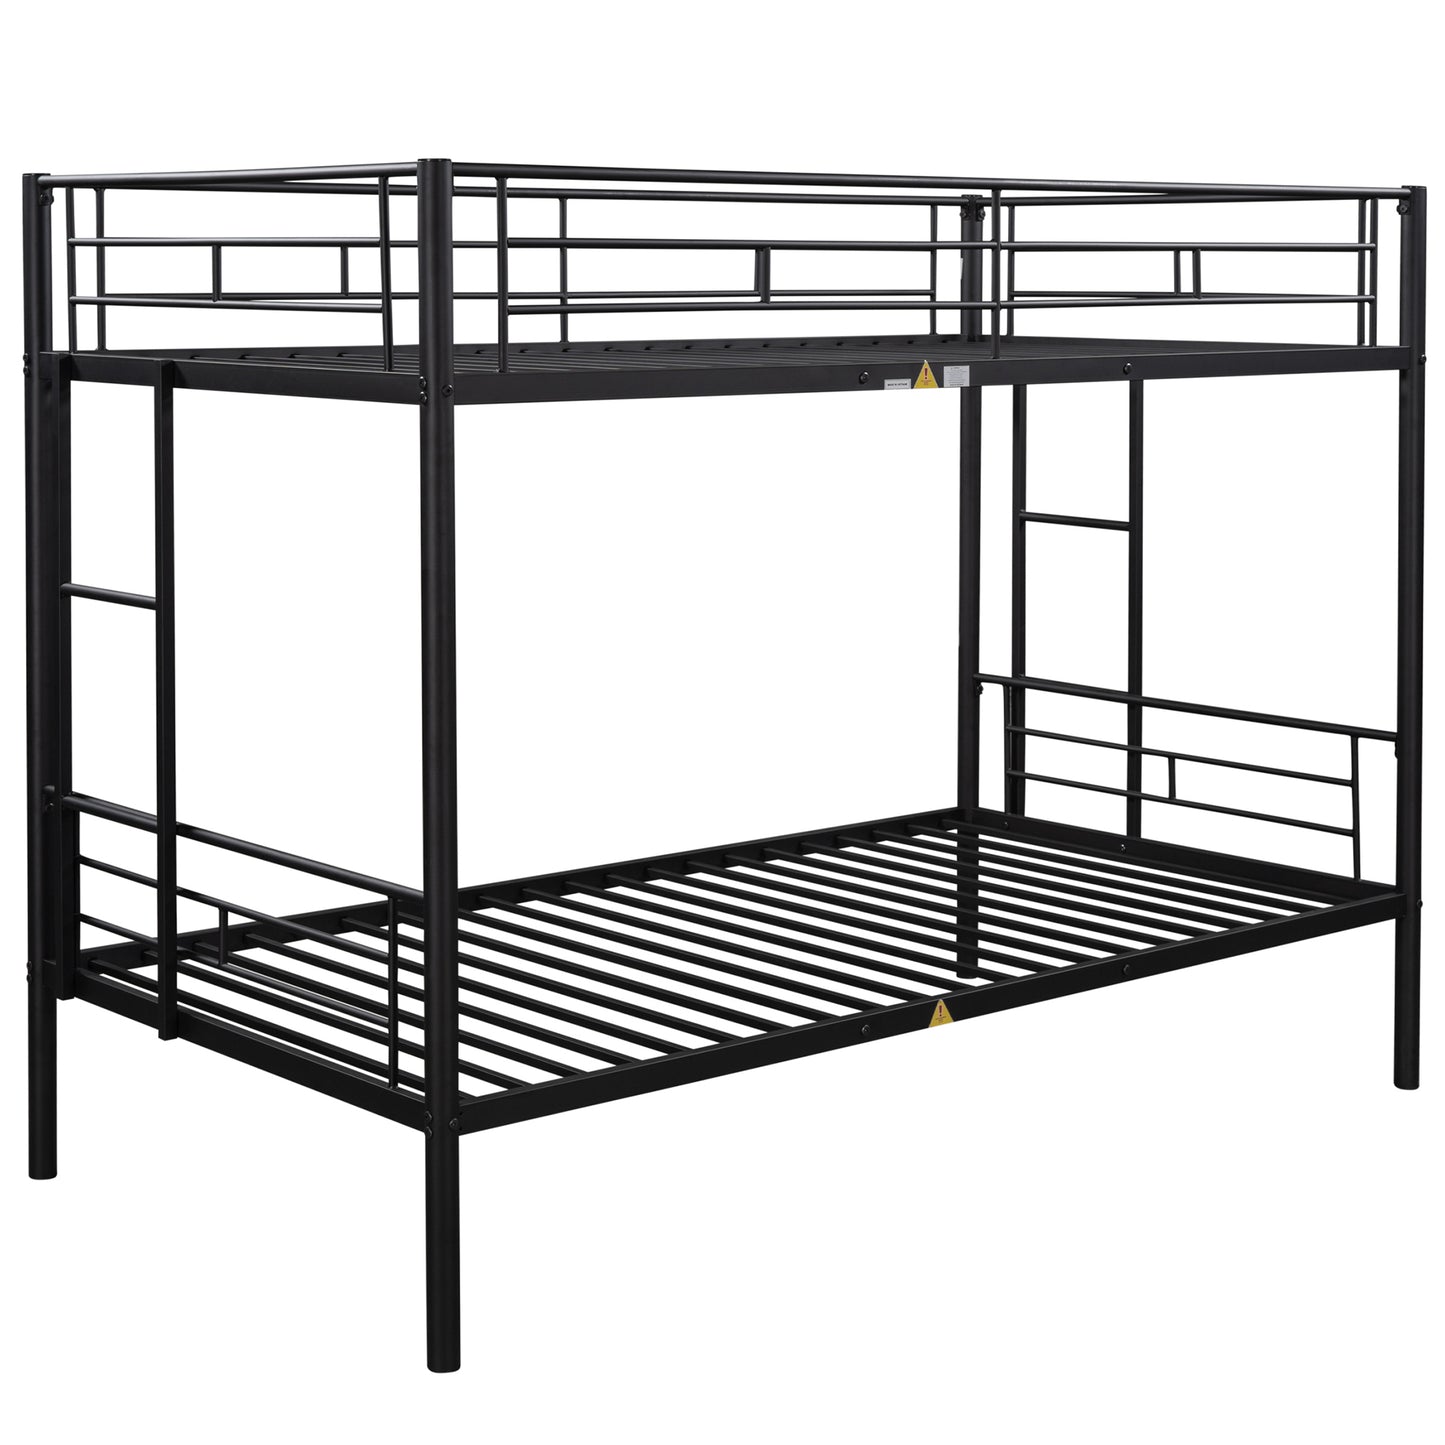 SYNGAR Metal Twin Over Twin Bunk Beds, Twin Bunk Beds for Kids Teens Adults, Industrial Bunkbed No Box Spring Required, Black